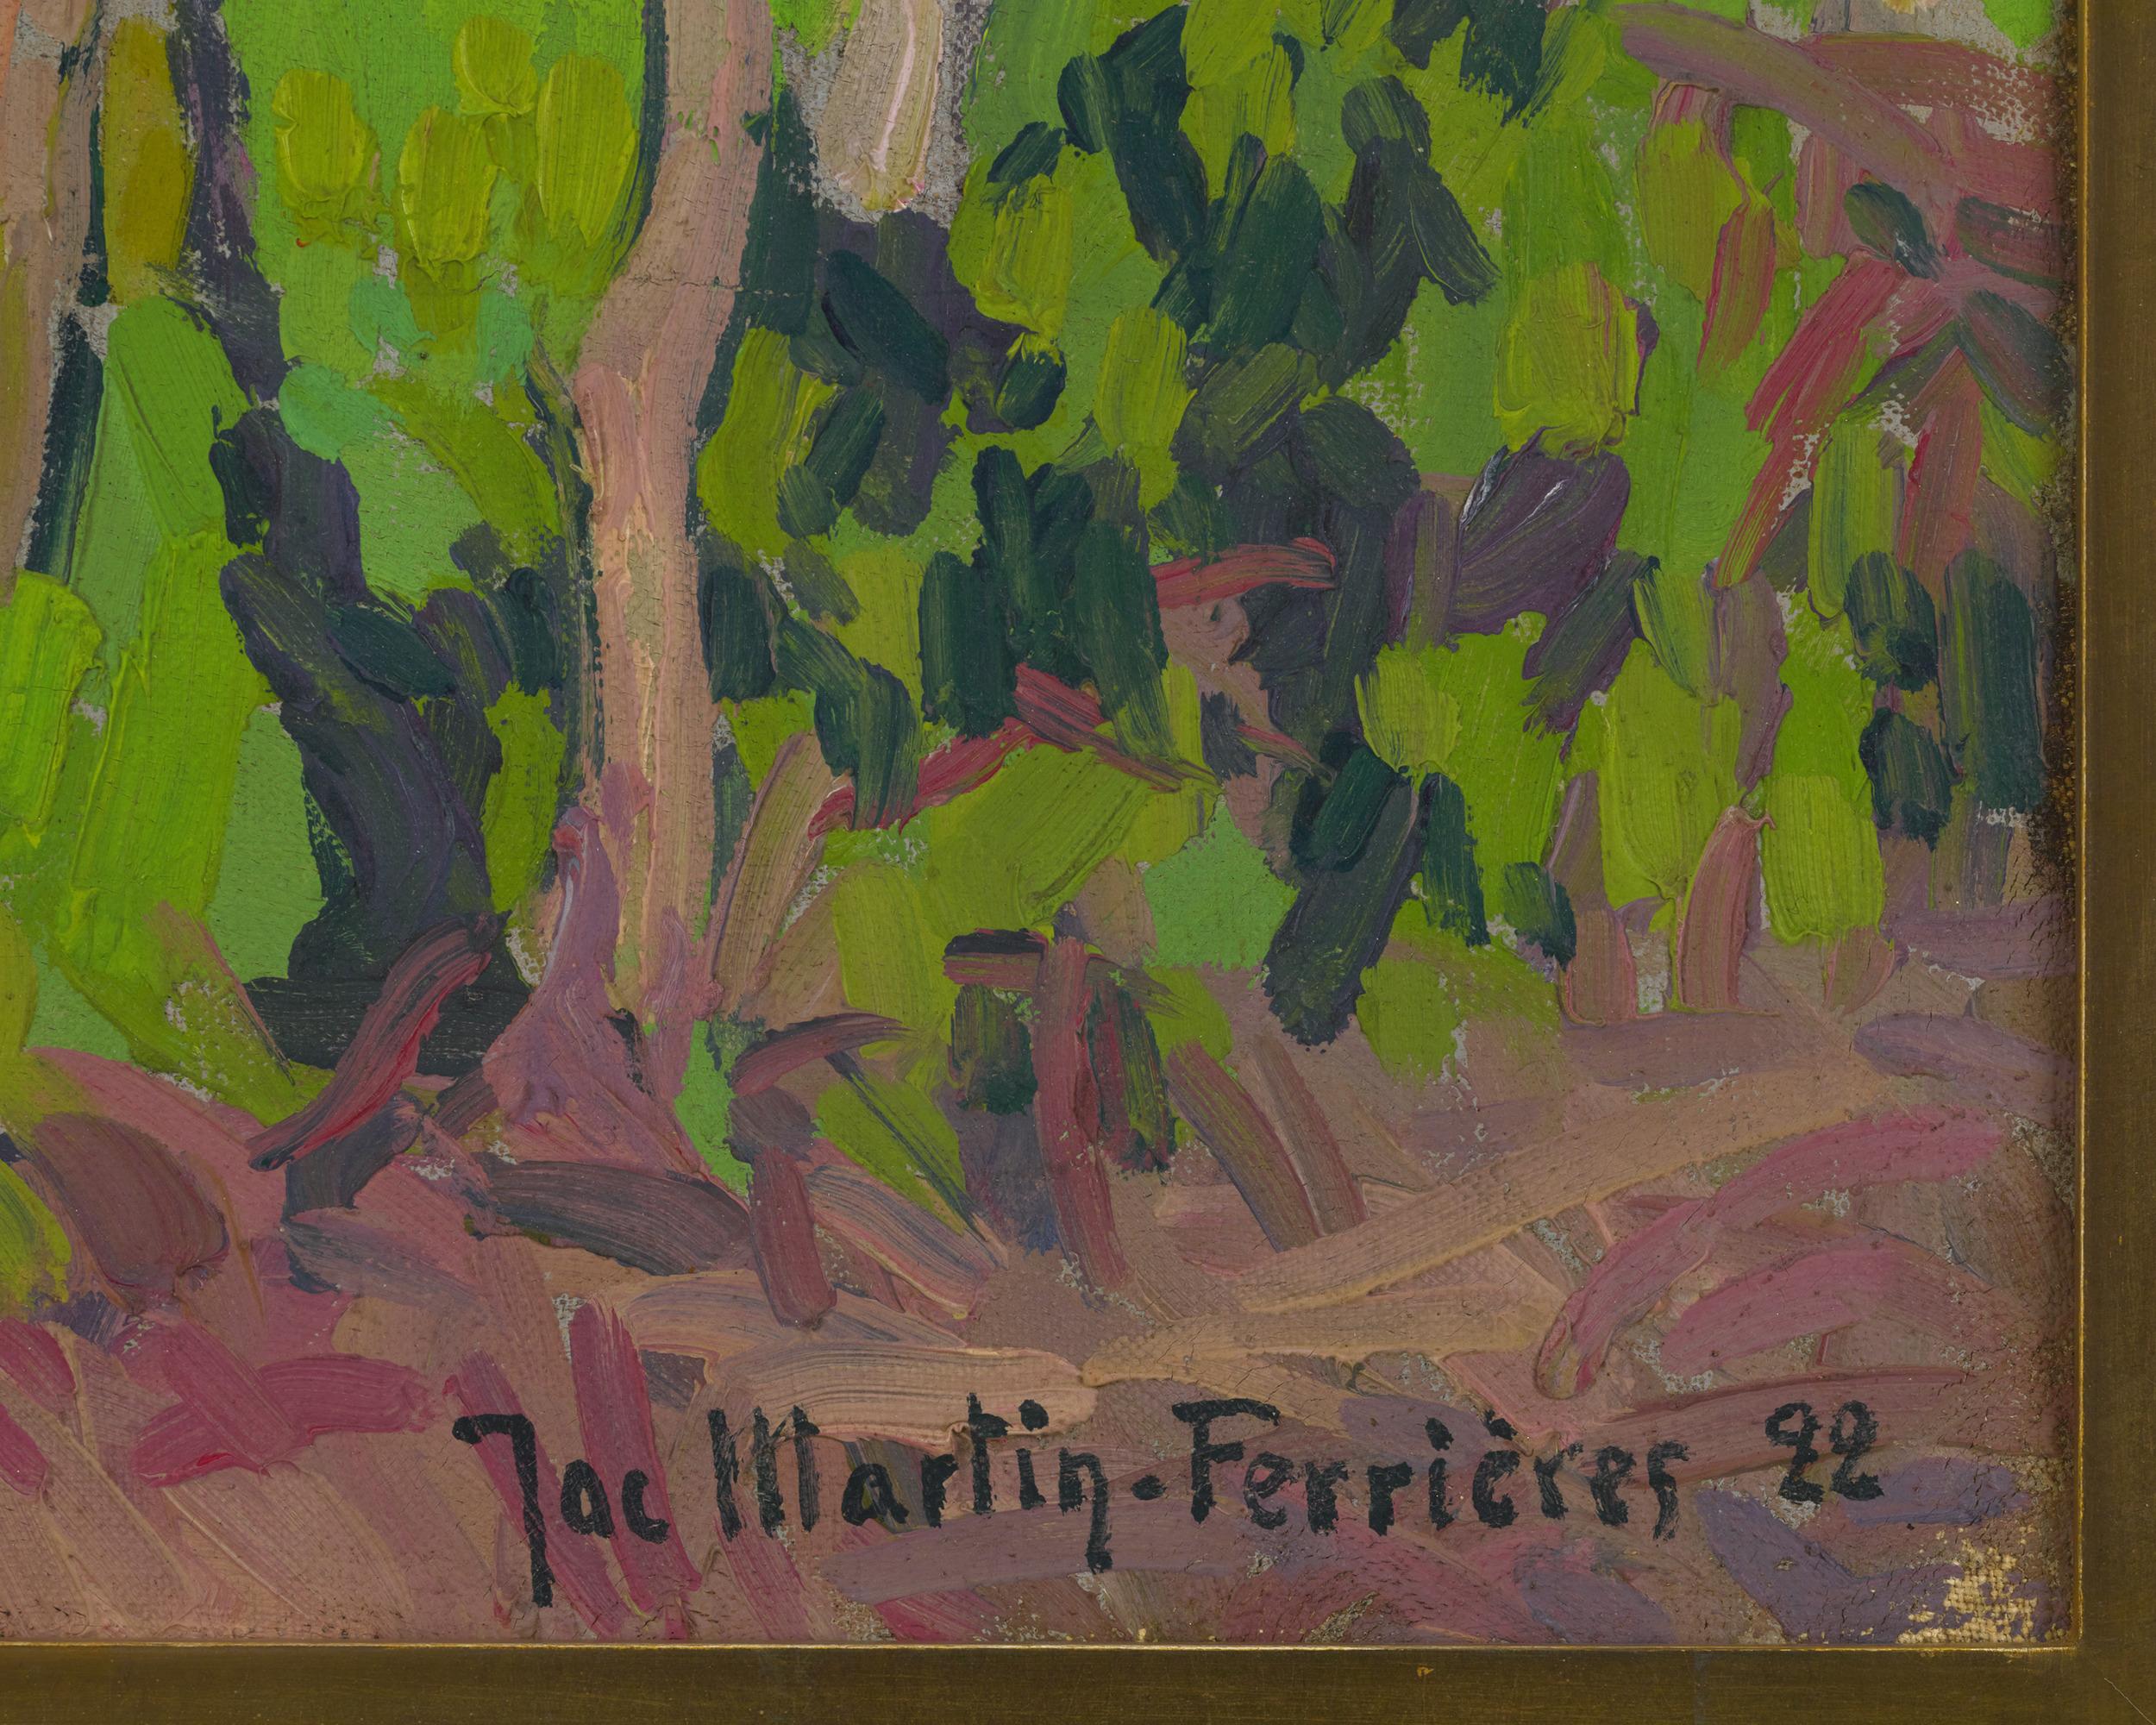 Jacques Martin-Ferrières
1893-1972  French

Saint-Cirq Lapopie, sous-bois au ruisseau

Signed “Jac Martin-Ferrières 22” (lower right)
Oil on canvas

This enchanting oil on canvas was composed by the French painter Jacques Martin-Ferrières. In the